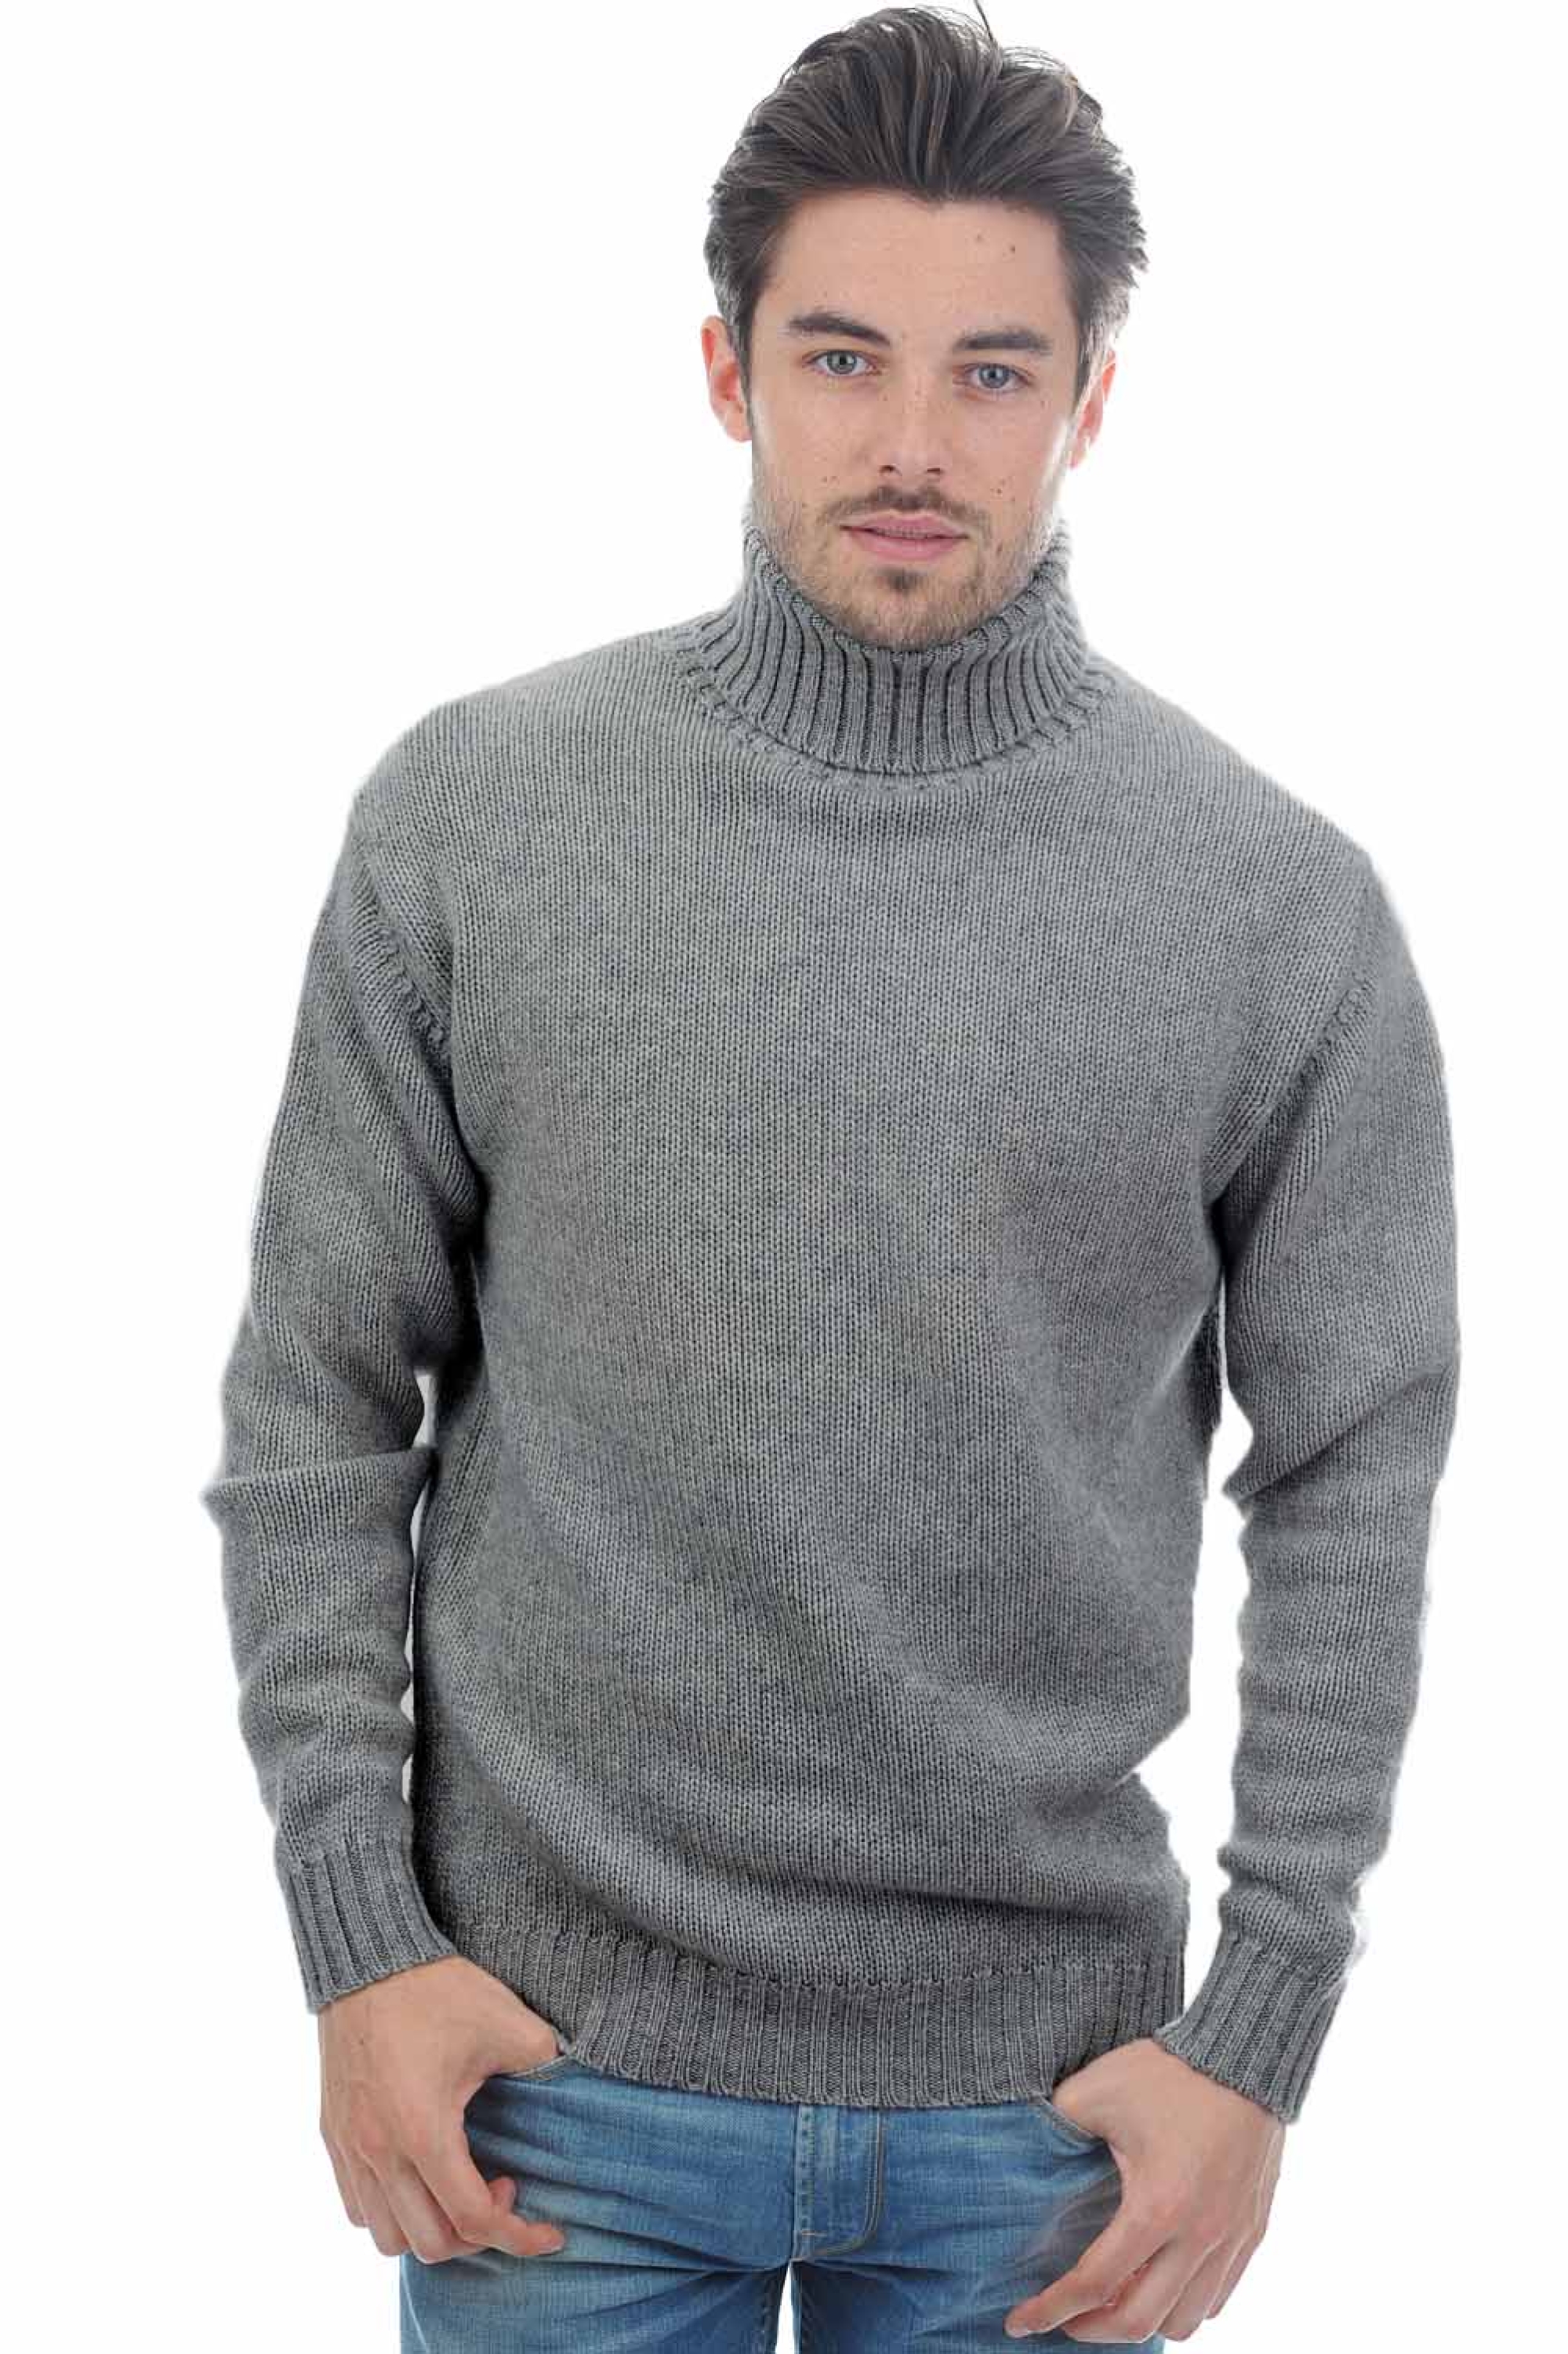 Cachemire pull homme col roule achille gris chine 2xl